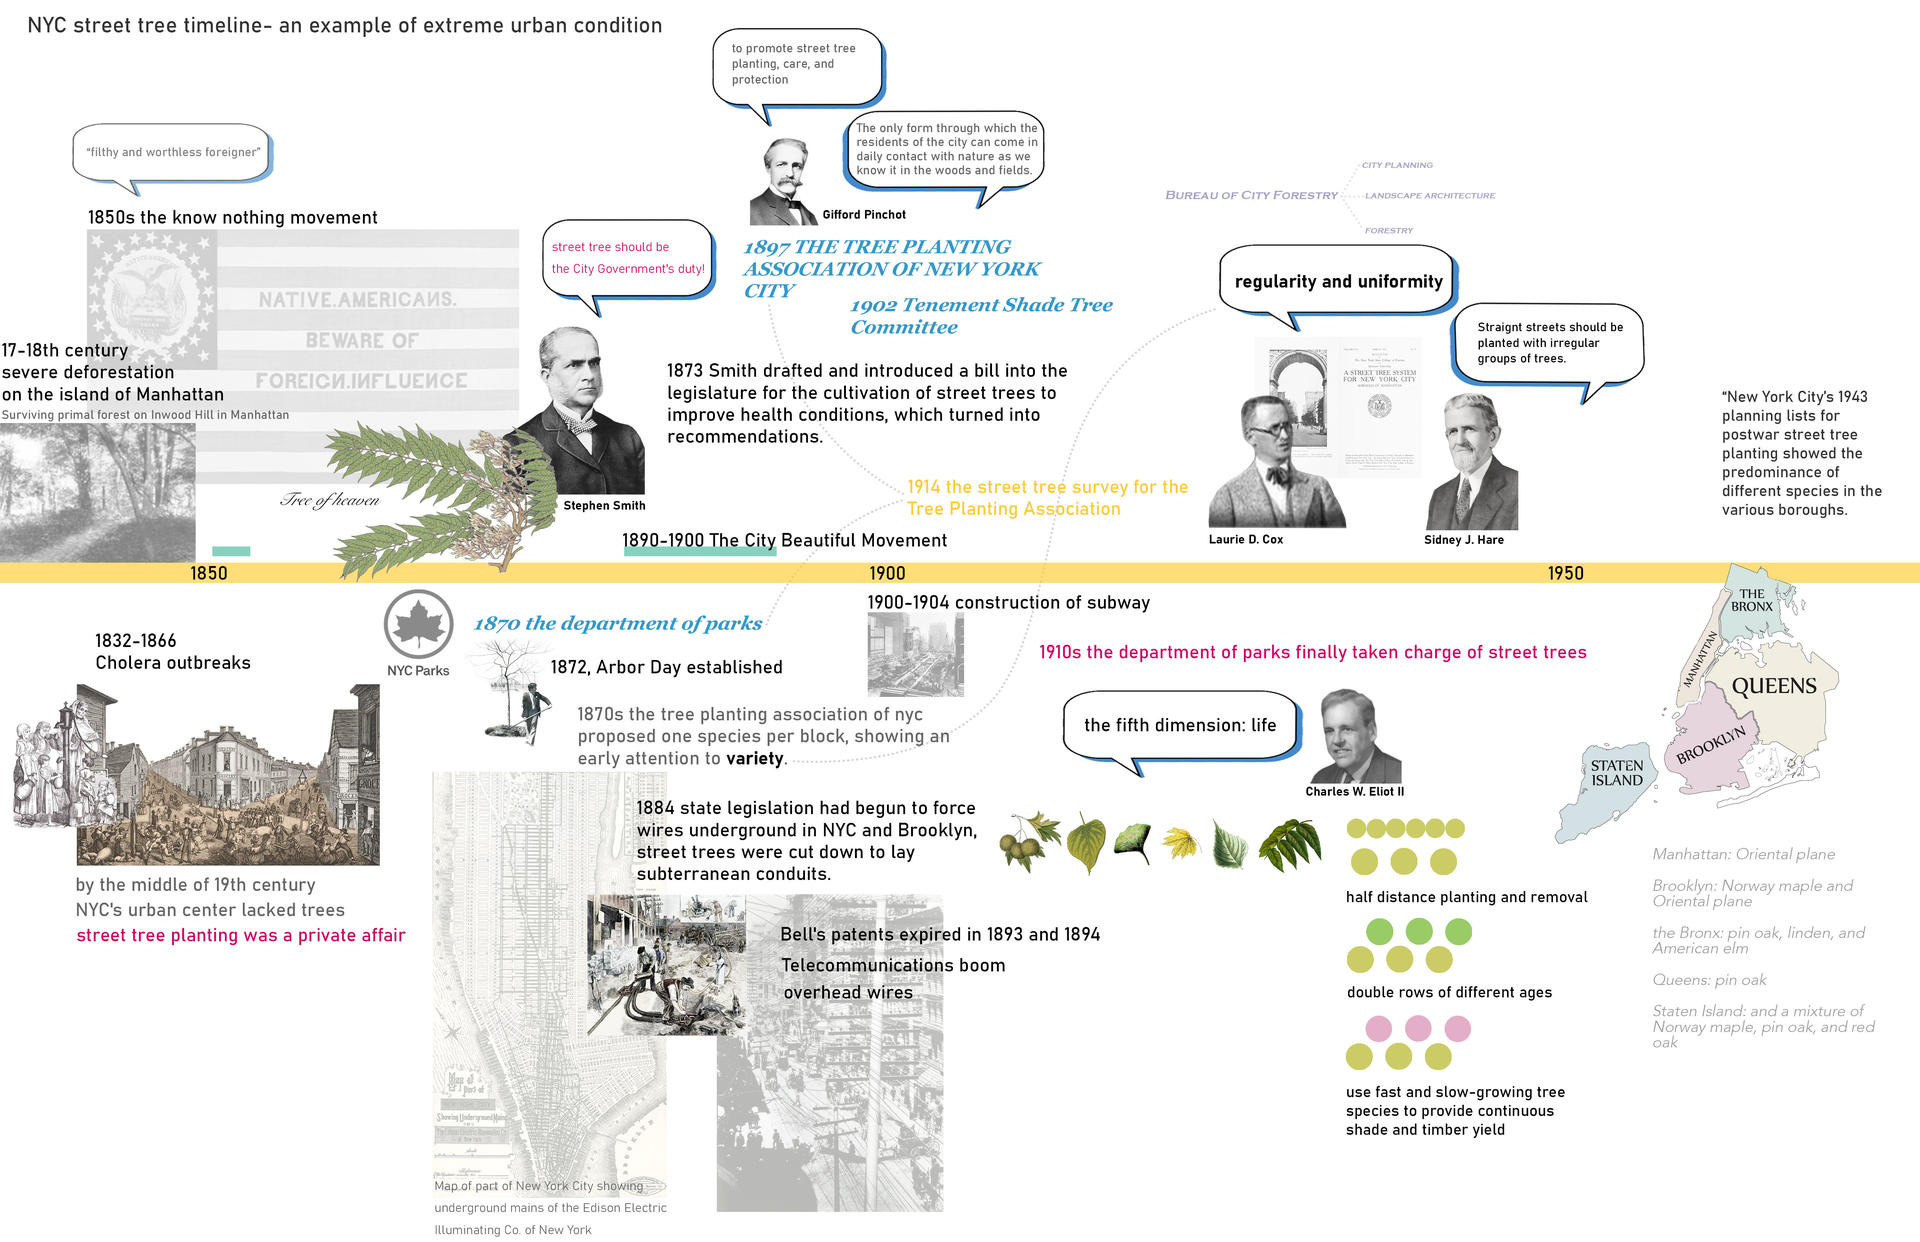 The timeline is showing the whole process of how street trees have become an important part of city planning and how theories of street planting evolve through time.